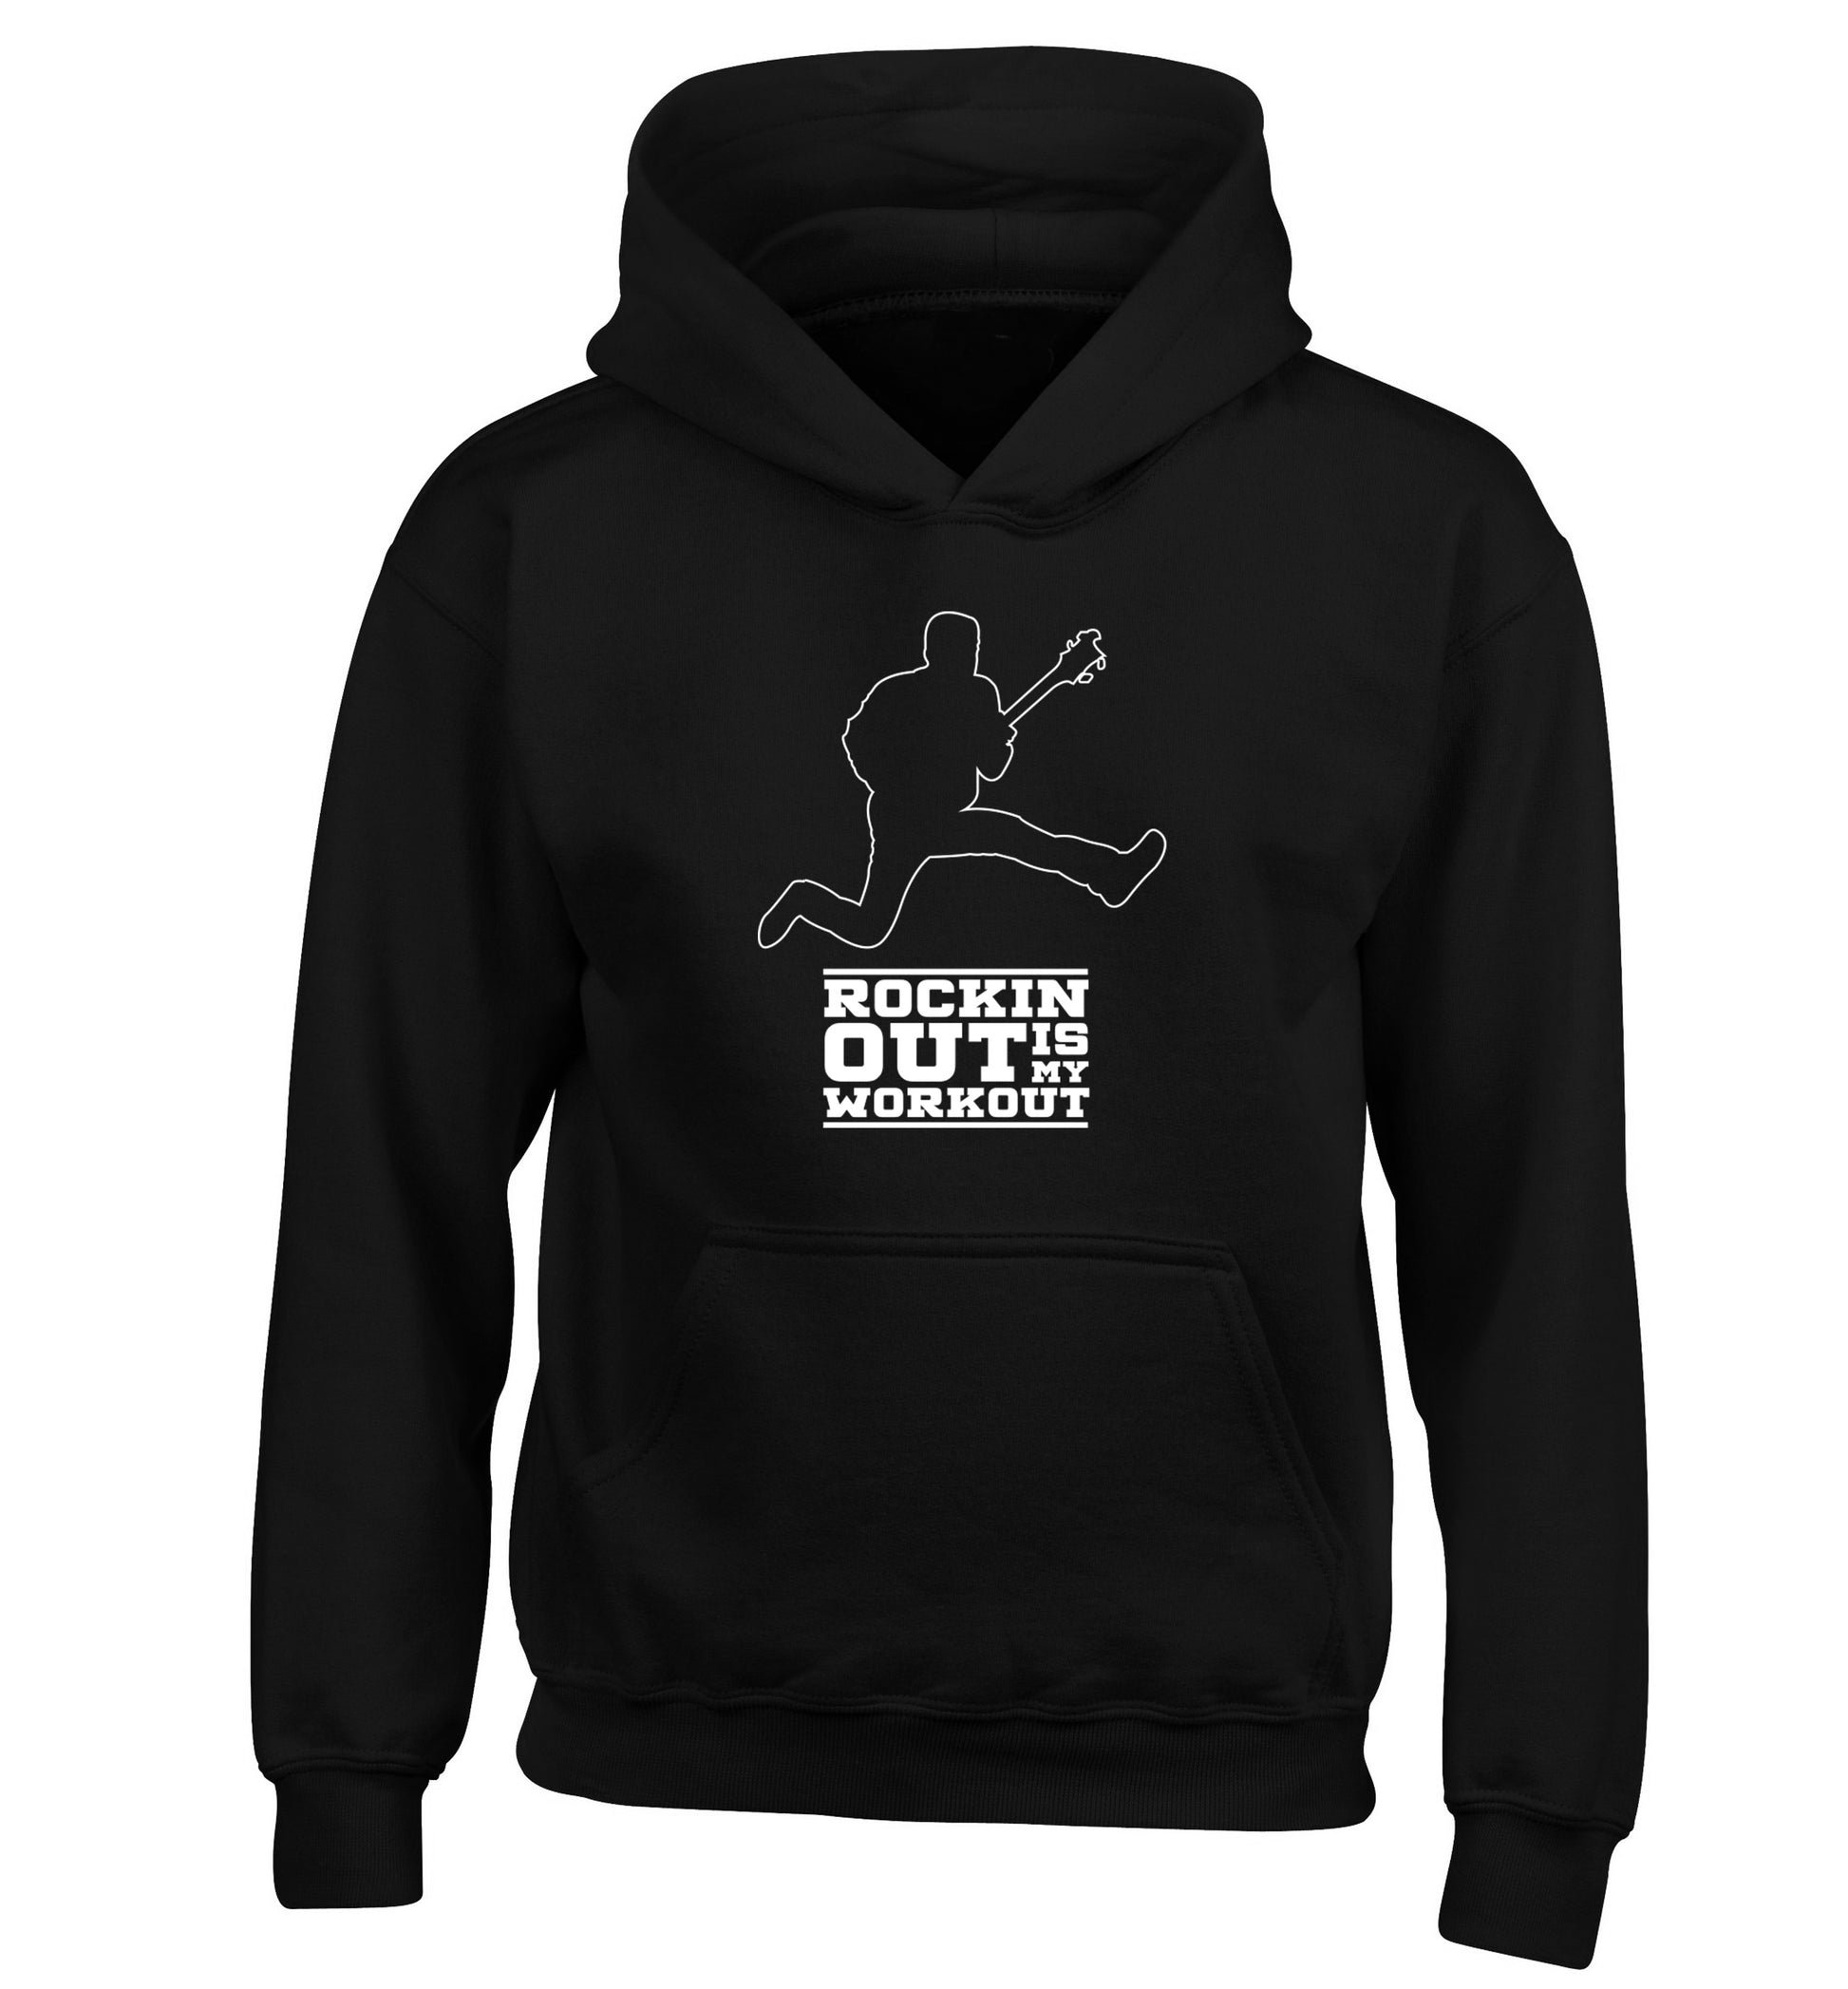 Rockin out is my workout 2 children's black hoodie 12-13 Years